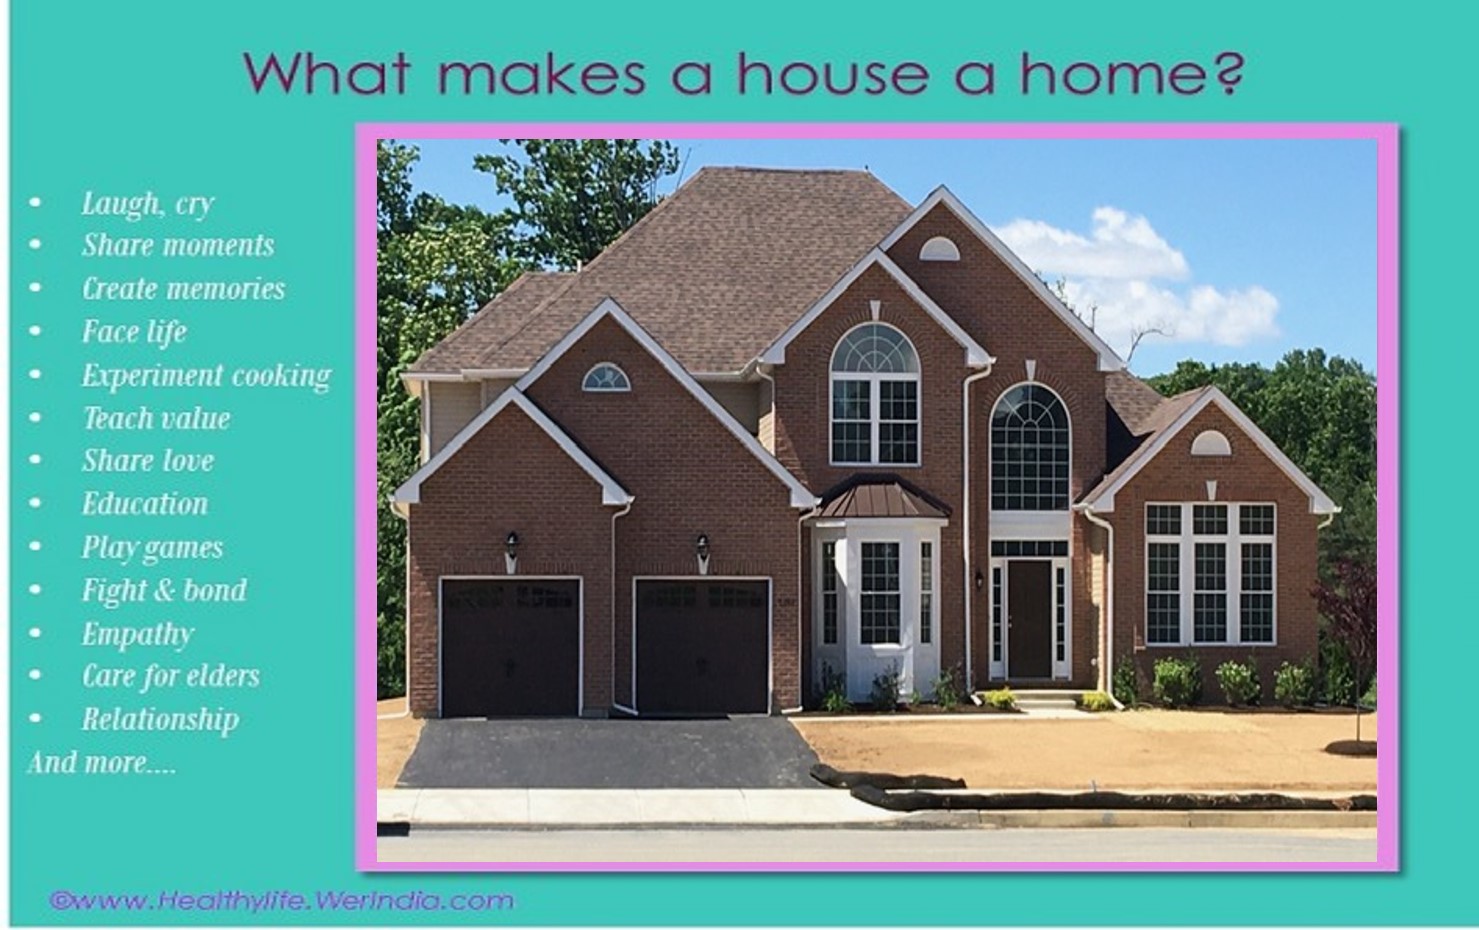 What makes a home